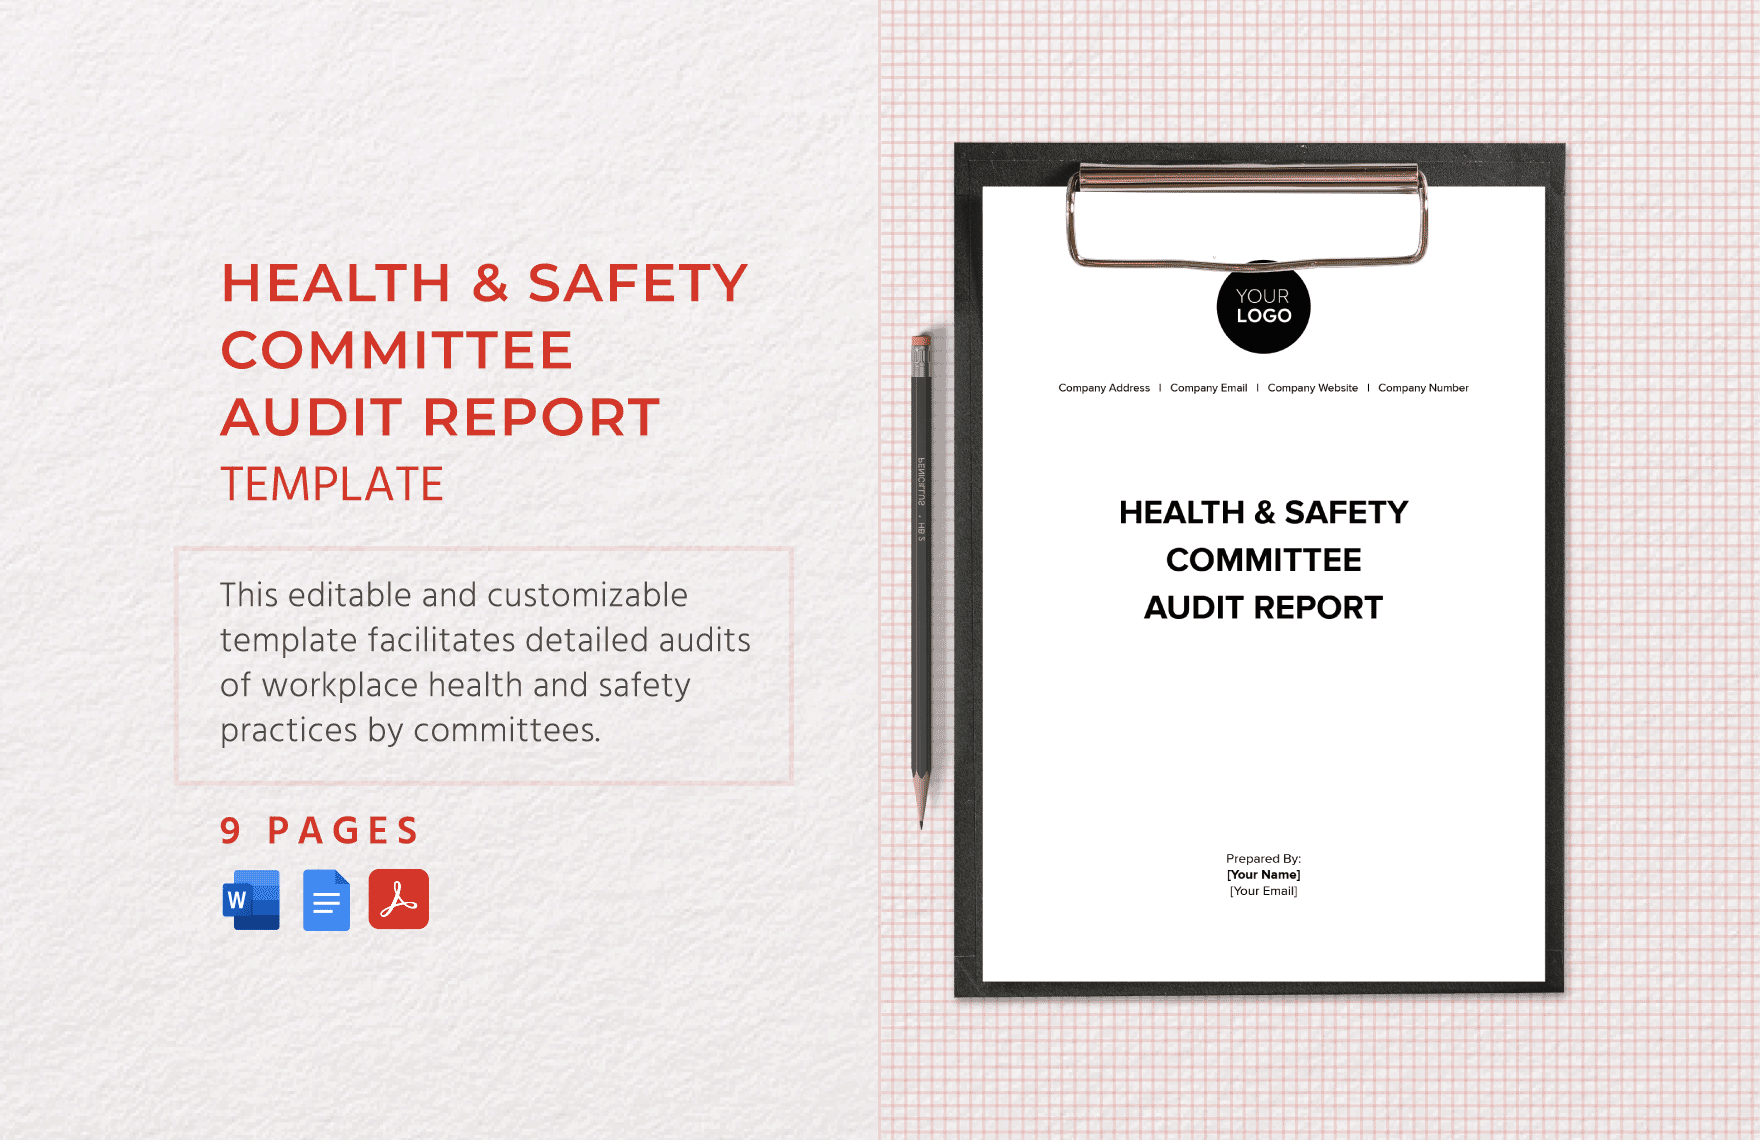 Health & Safety Committee Audit Report Template